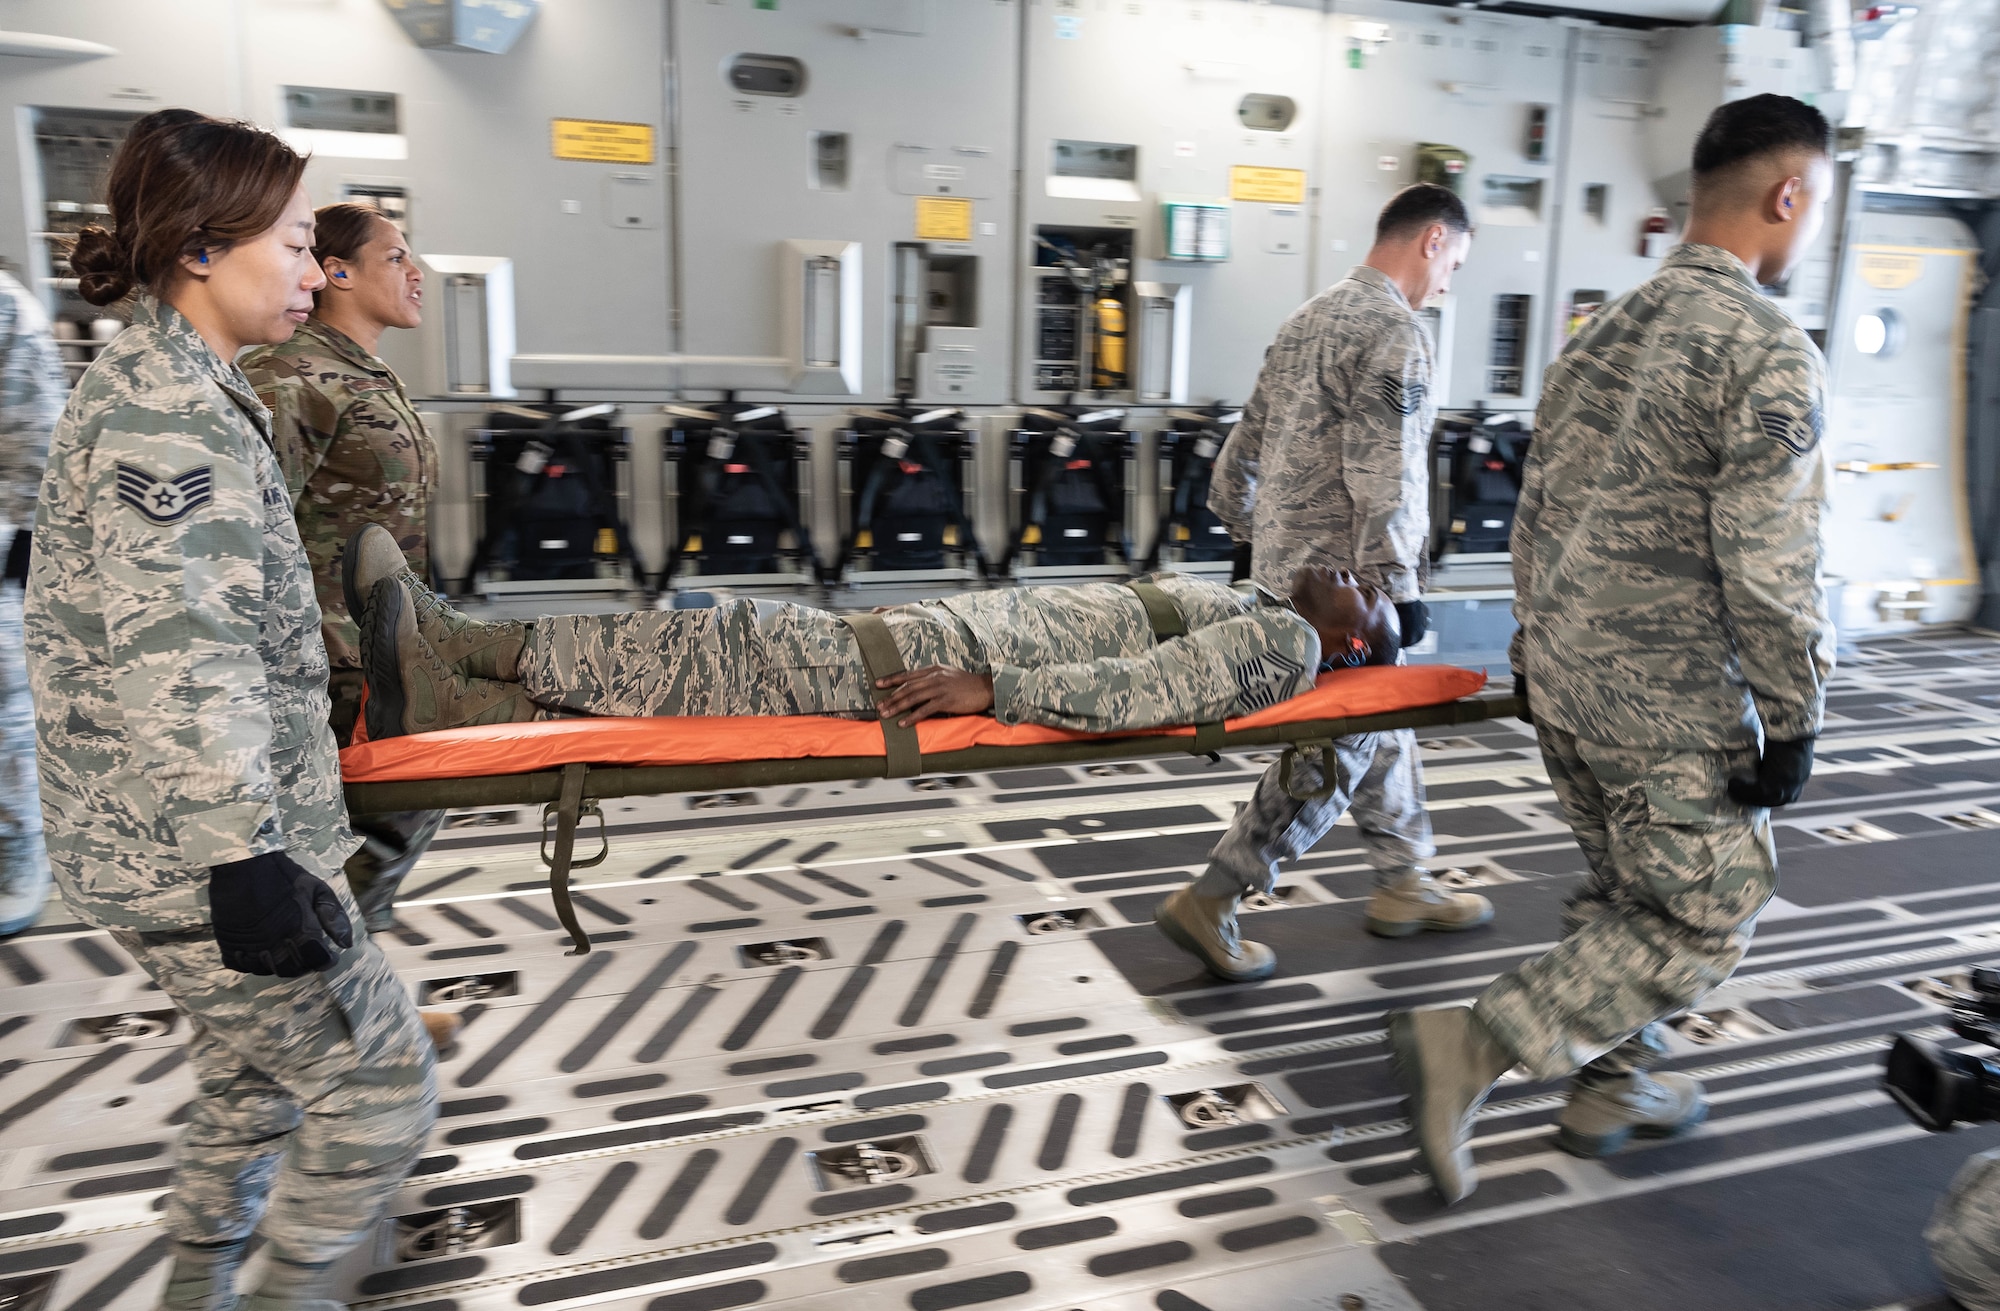 U.S. Air Force Master Sgt. Kassy Costales, back left, and Staff Sgt. Alexandria Davis carry the back end of the patient litter during a training scenario, both are members of the Air Force Reserve’s 624th Aeromedical Staging Squadron, at Joint Base Pearl Harbor-Hickam, Hawaii, March 3, 2019.